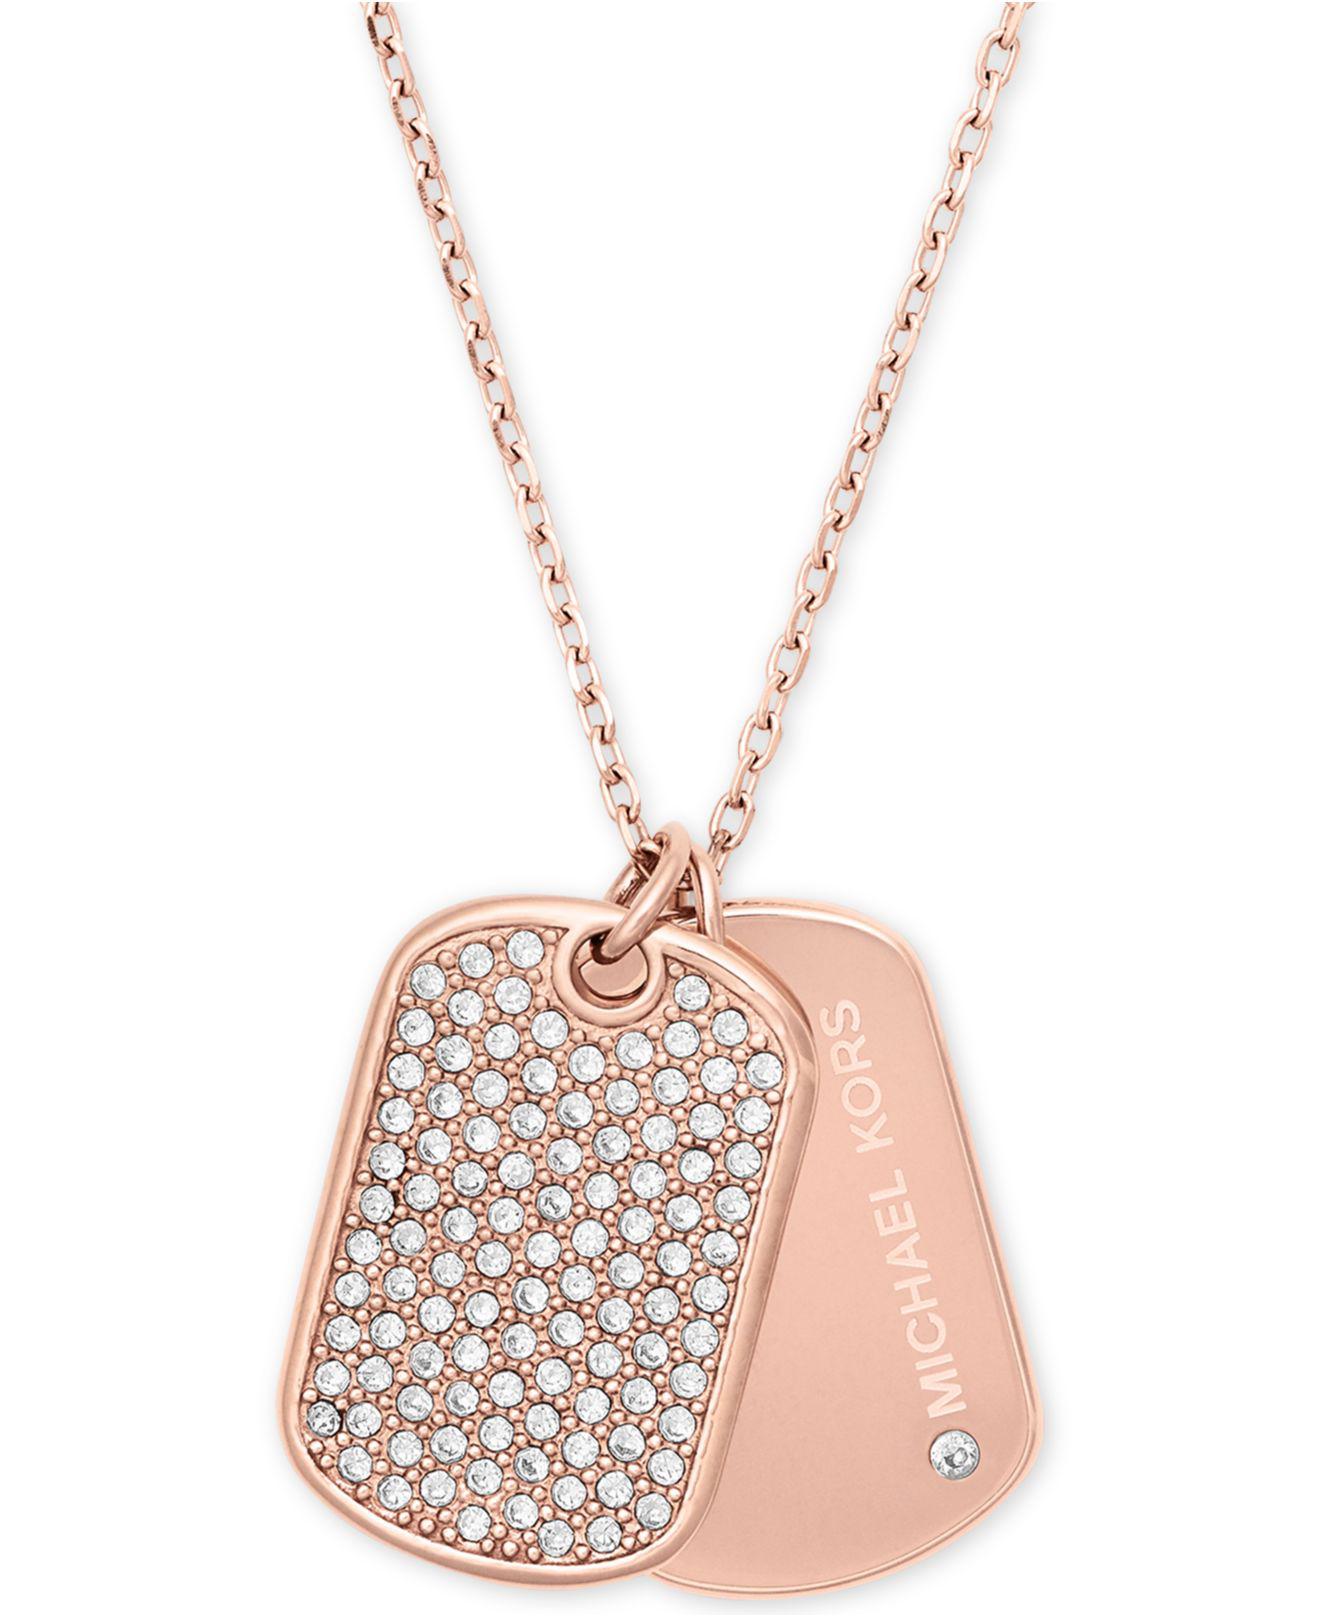 The Rose Gold Collection Dog Tags